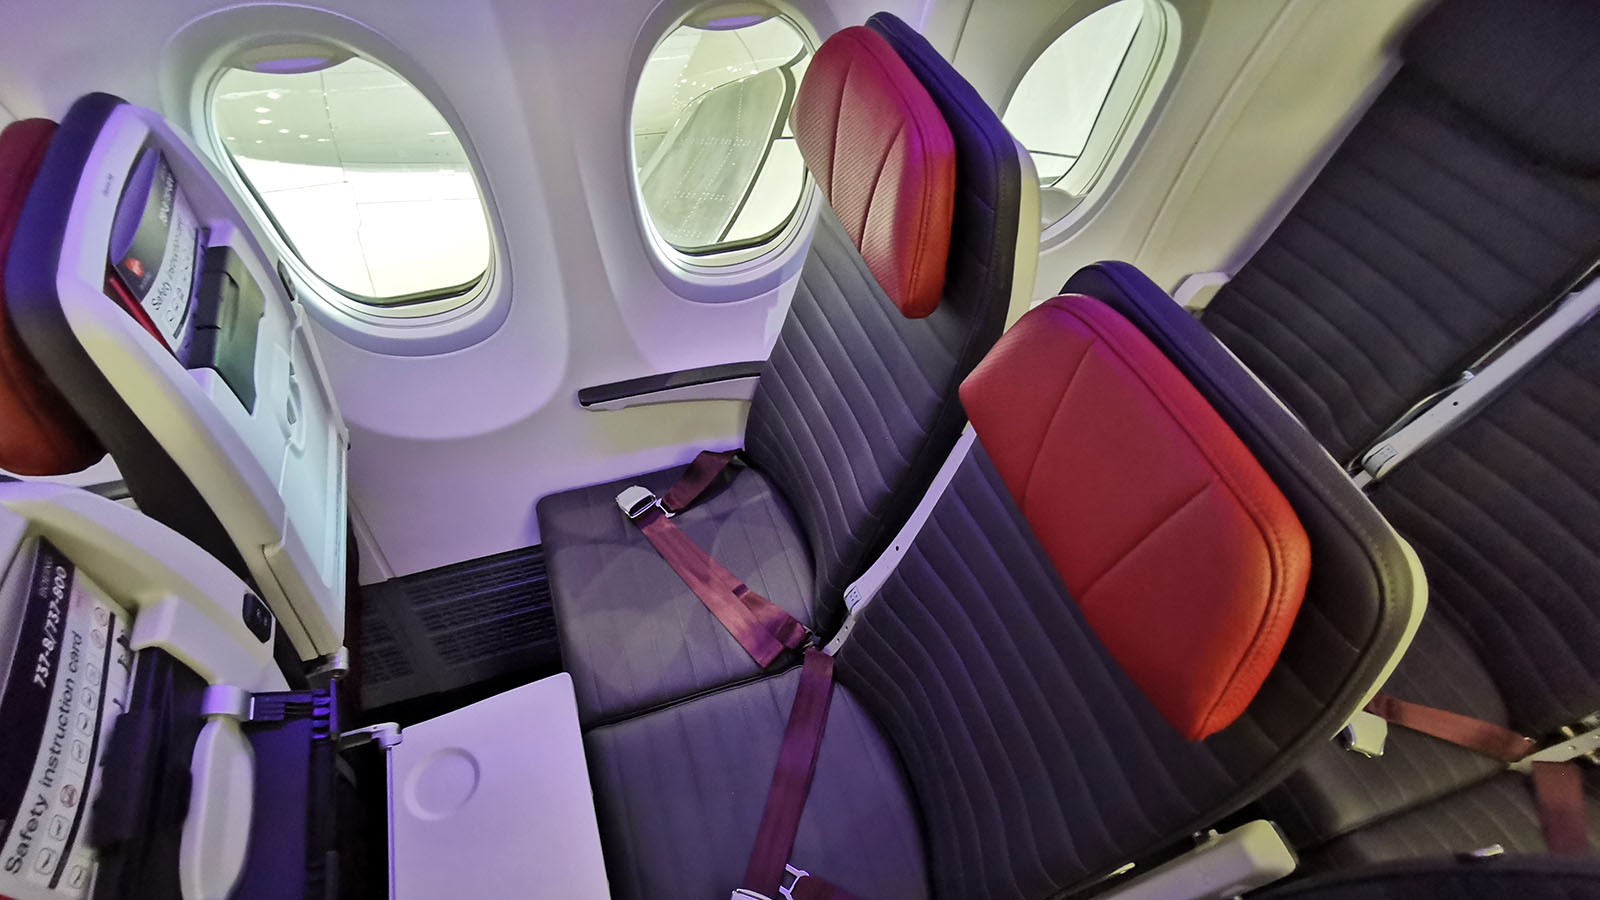 Virgin Australia Boeing 737 MAX 8 Economy Class from above